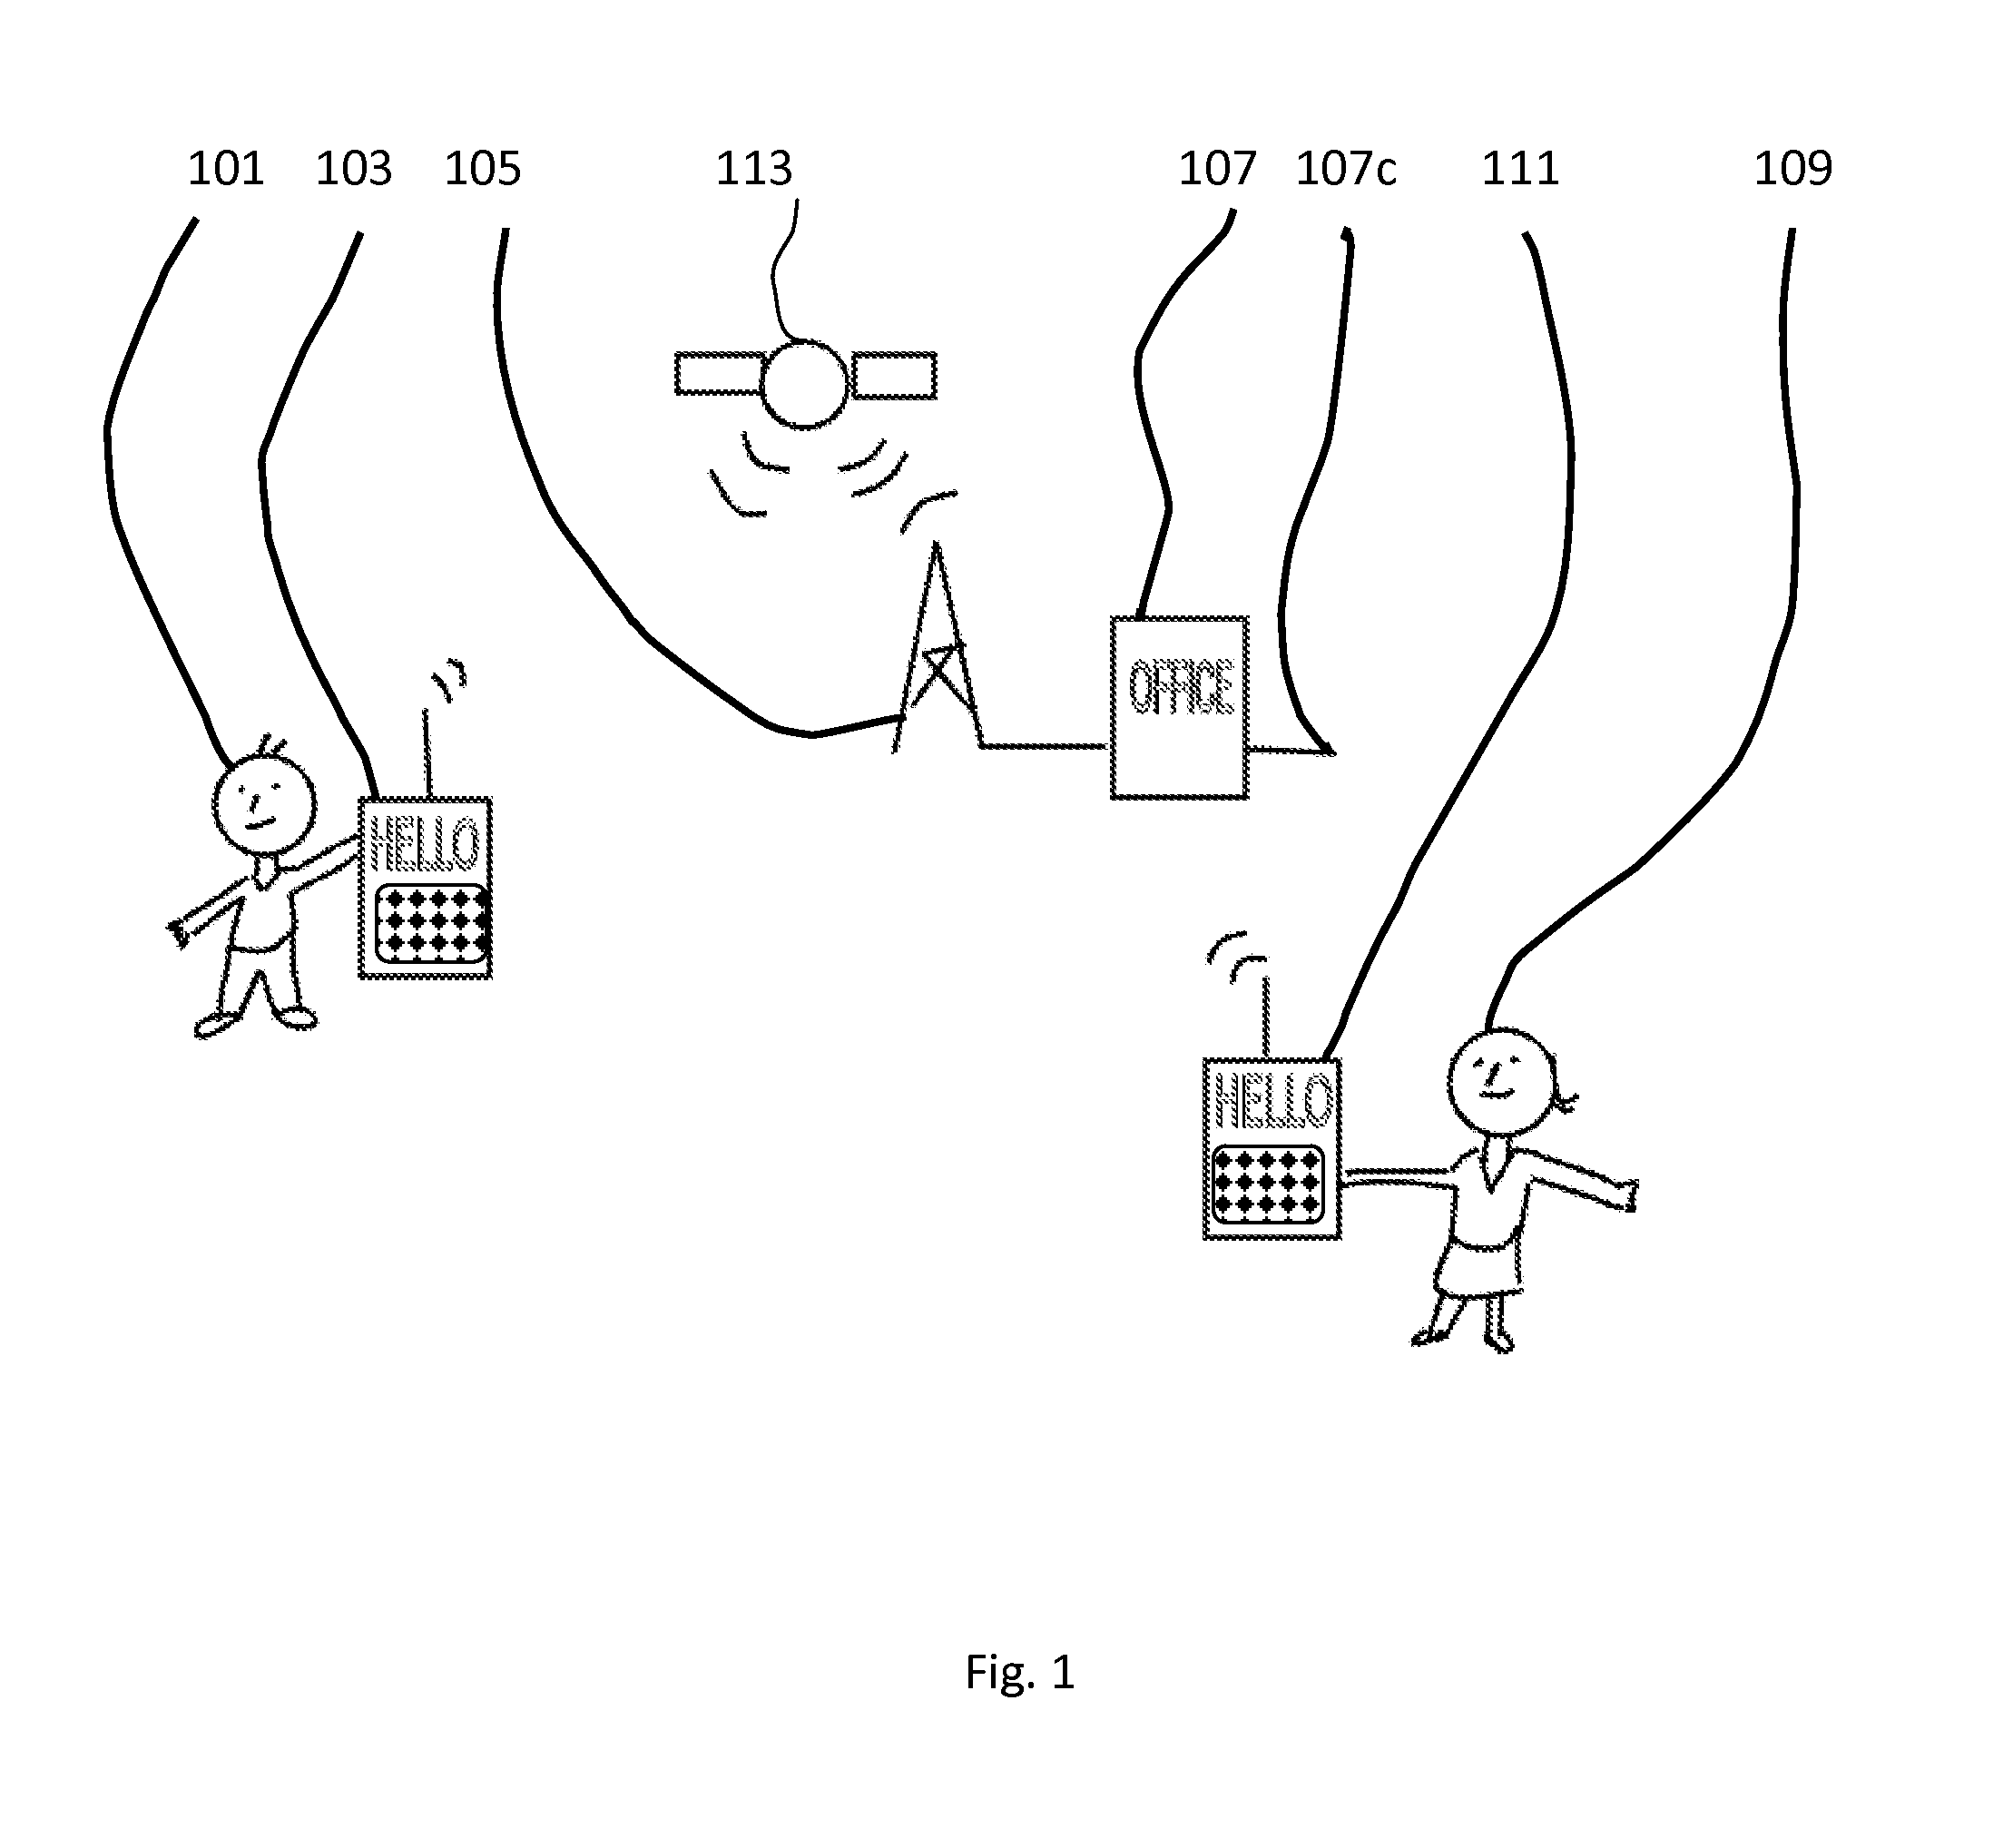 System and method for safely blocking mobile communications usages